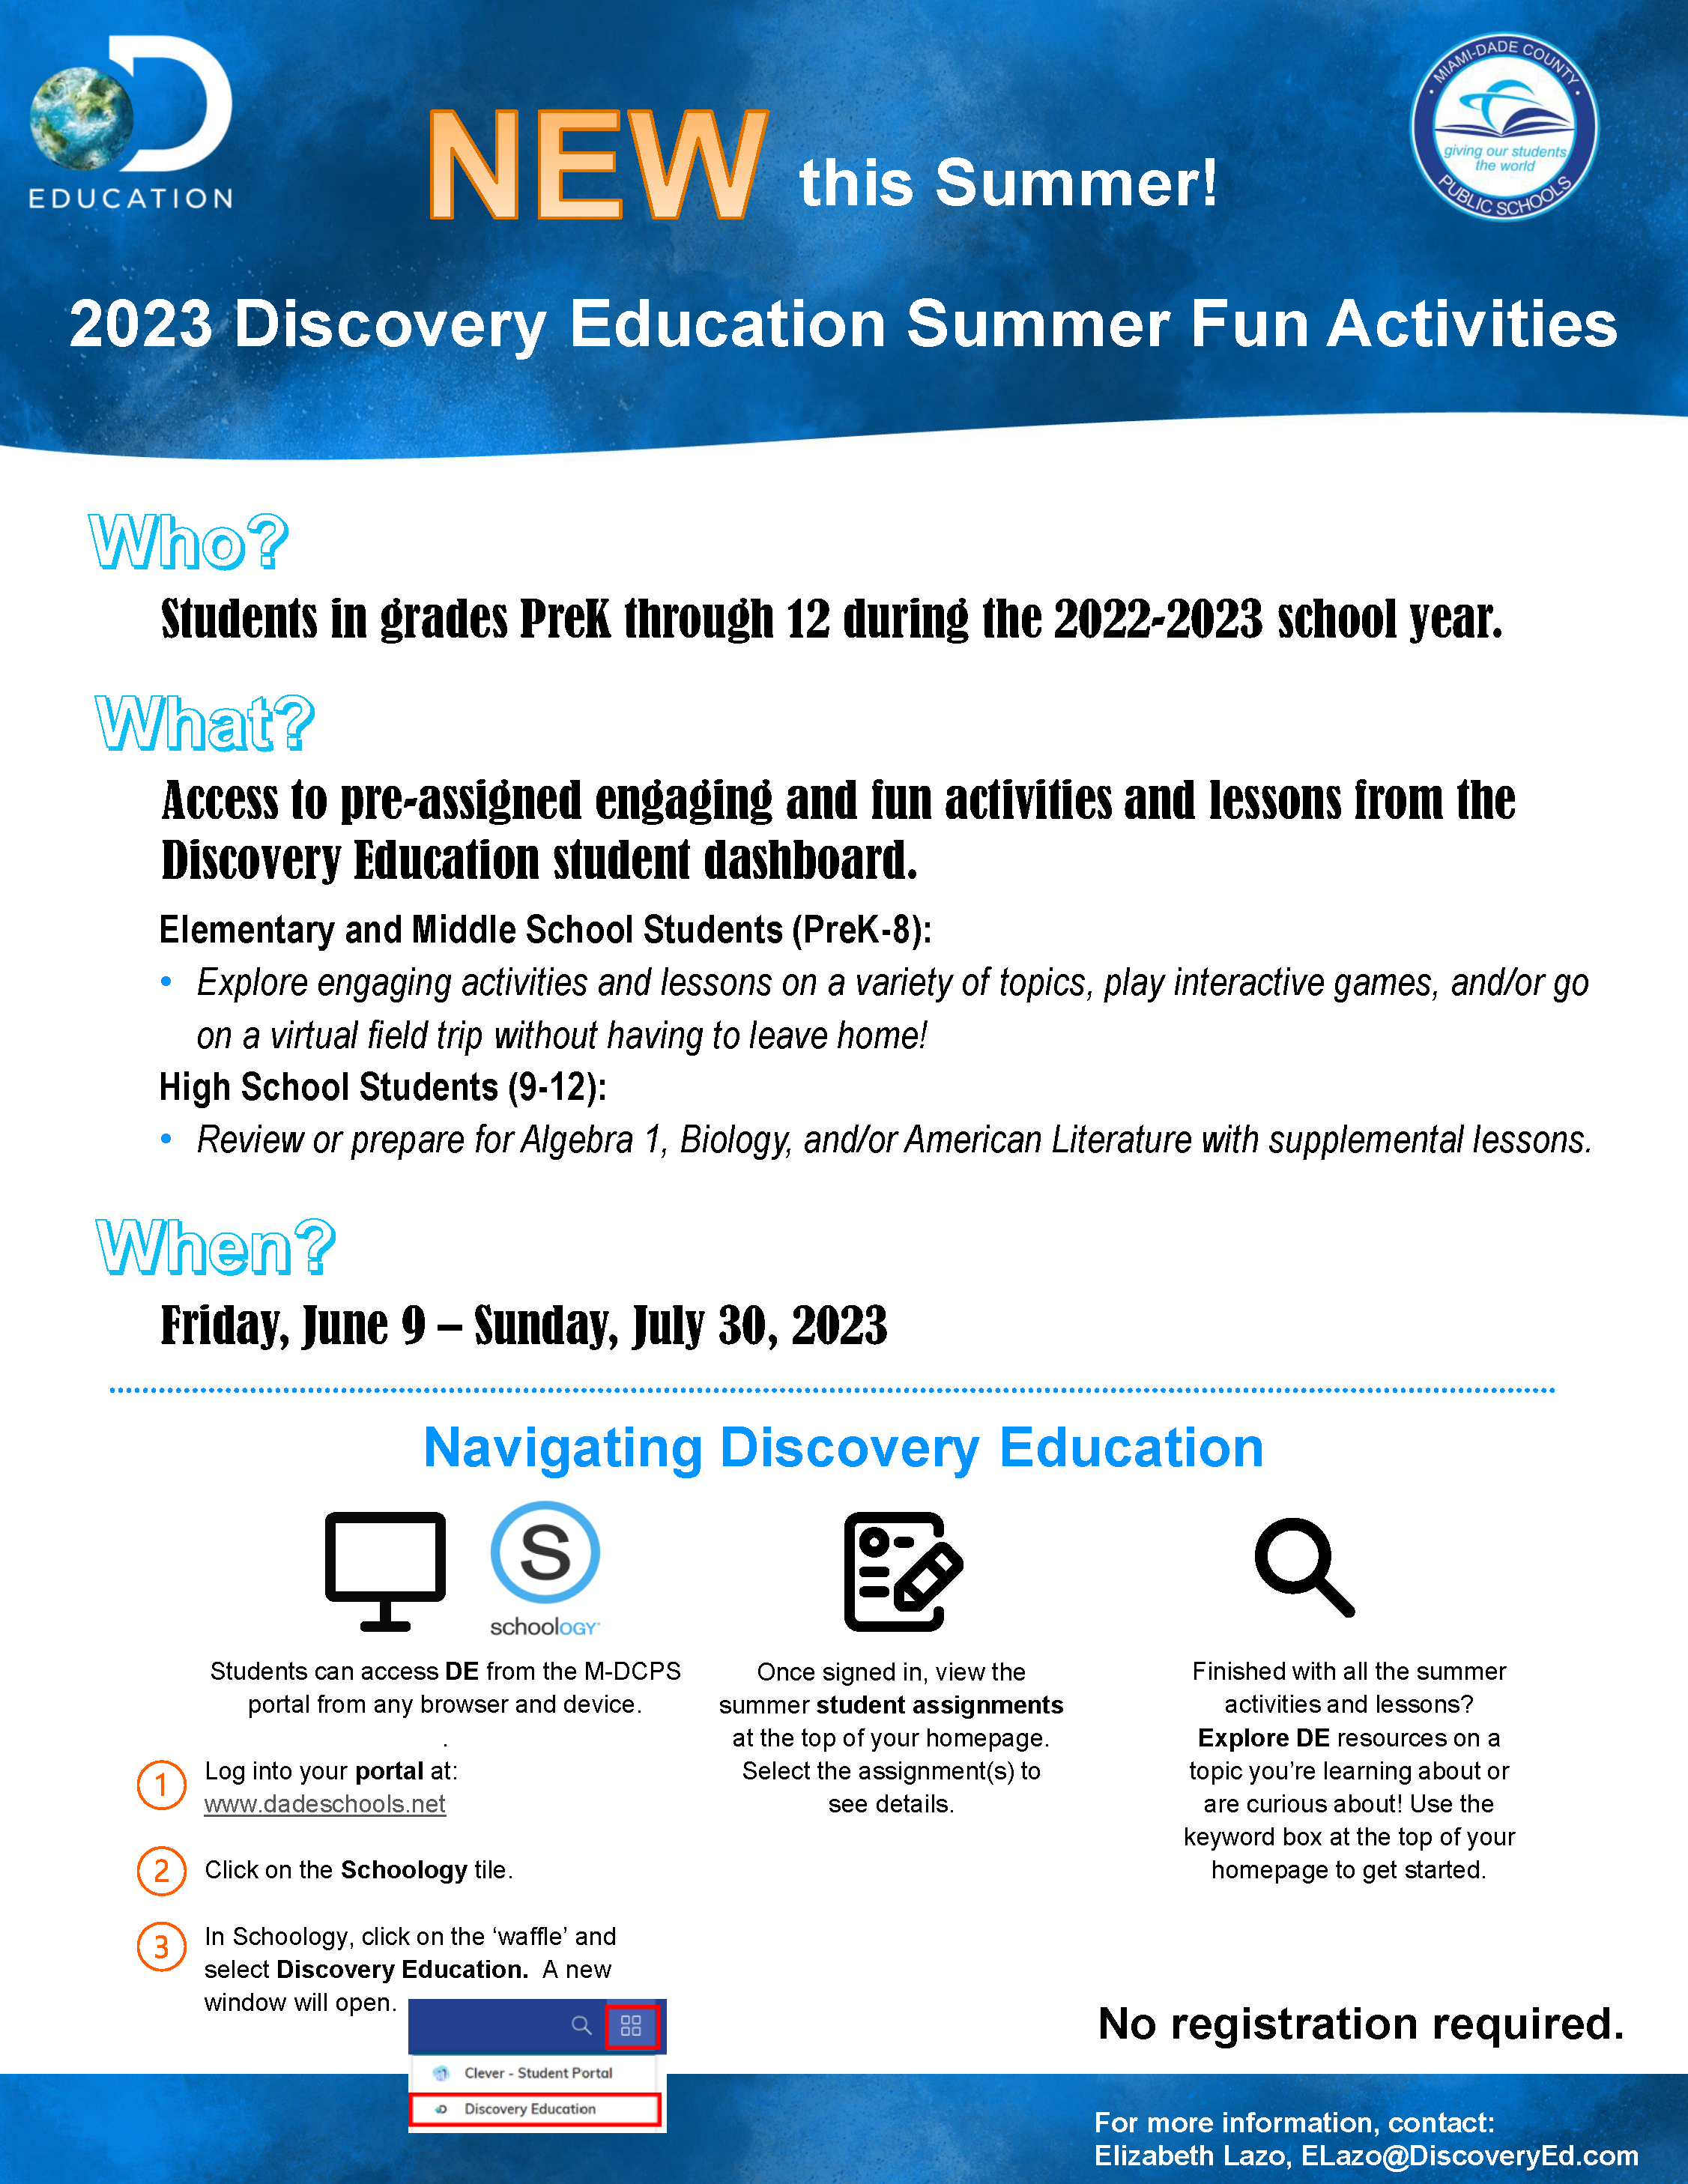 2023 Discovery Education Summer Fun Activities Flyer 